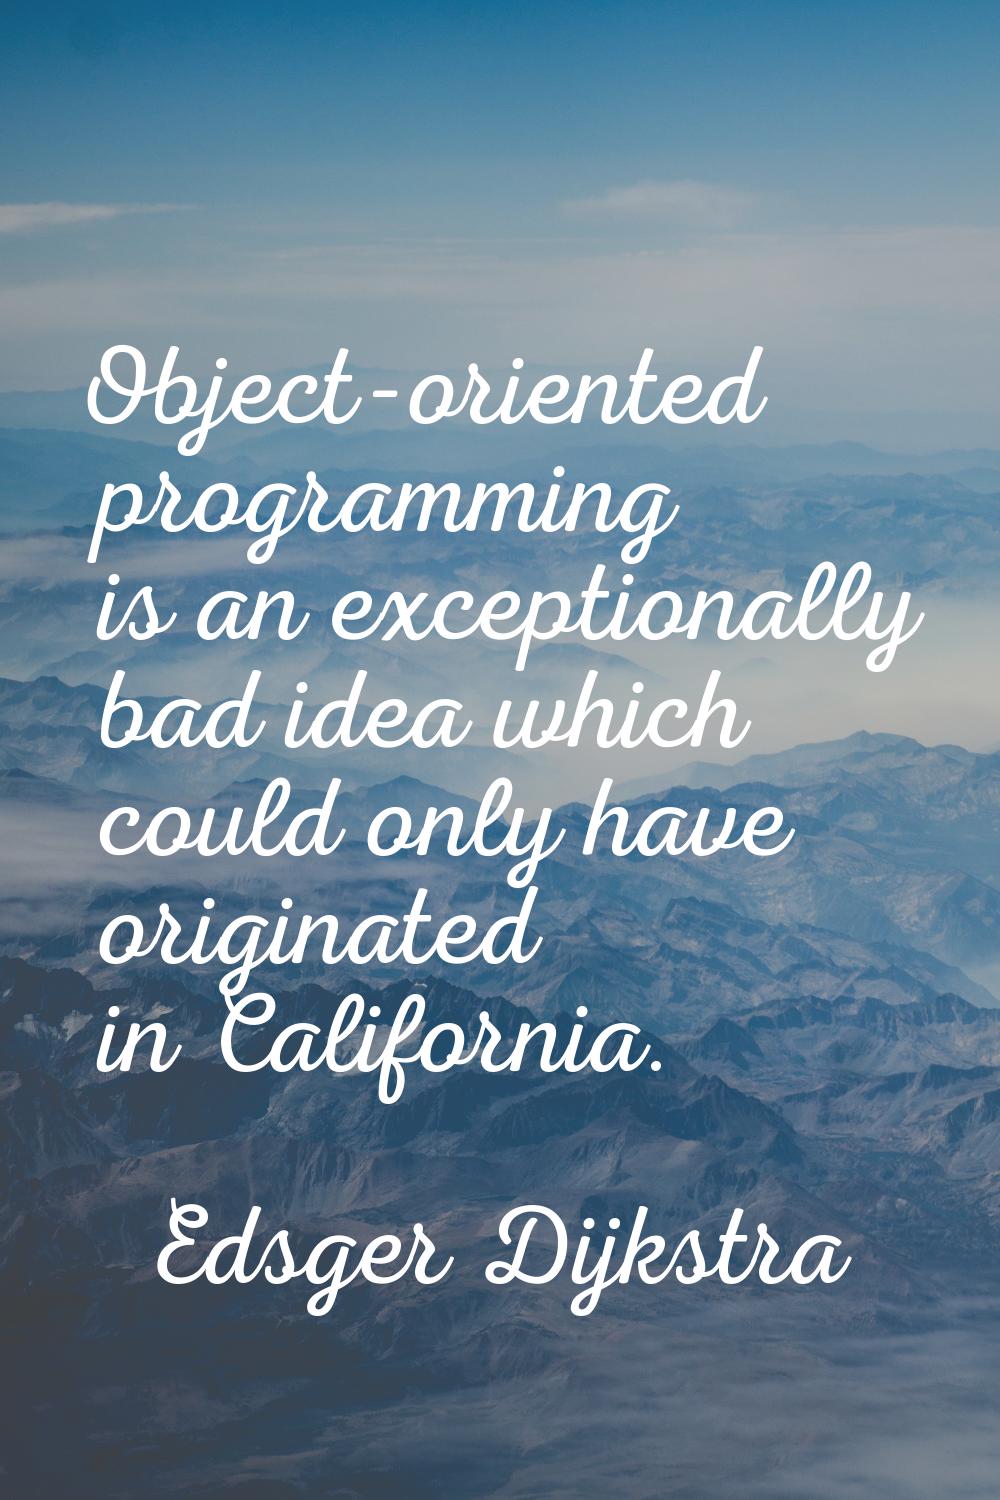 Object-oriented programming is an exceptionally bad idea which could only have originated in Califo